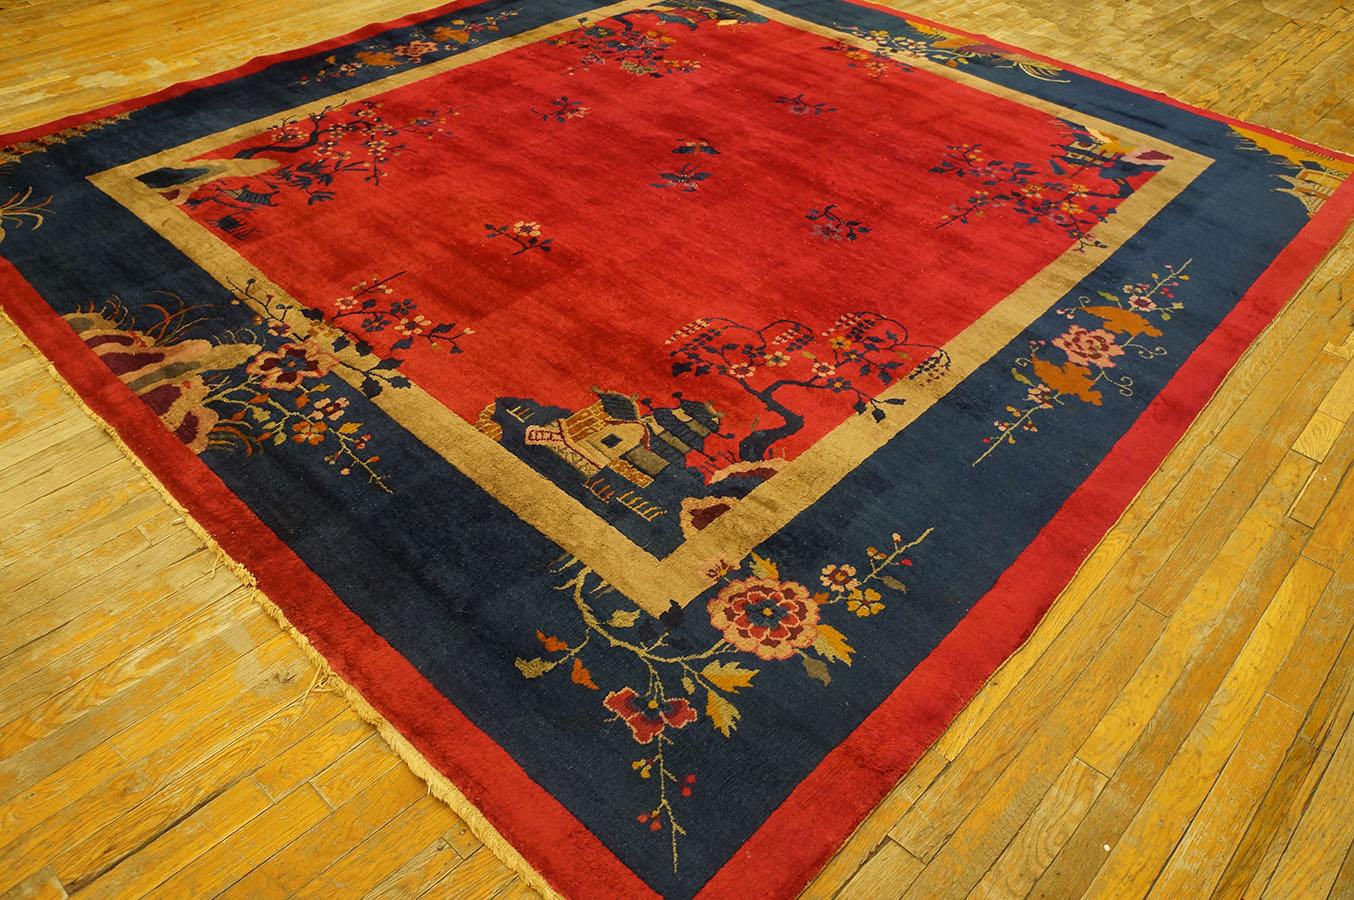 1920s Chinese Art Deco Carpet with Claret Background Color 
( 9' x 9' 9'' - 275 x 297 cm )